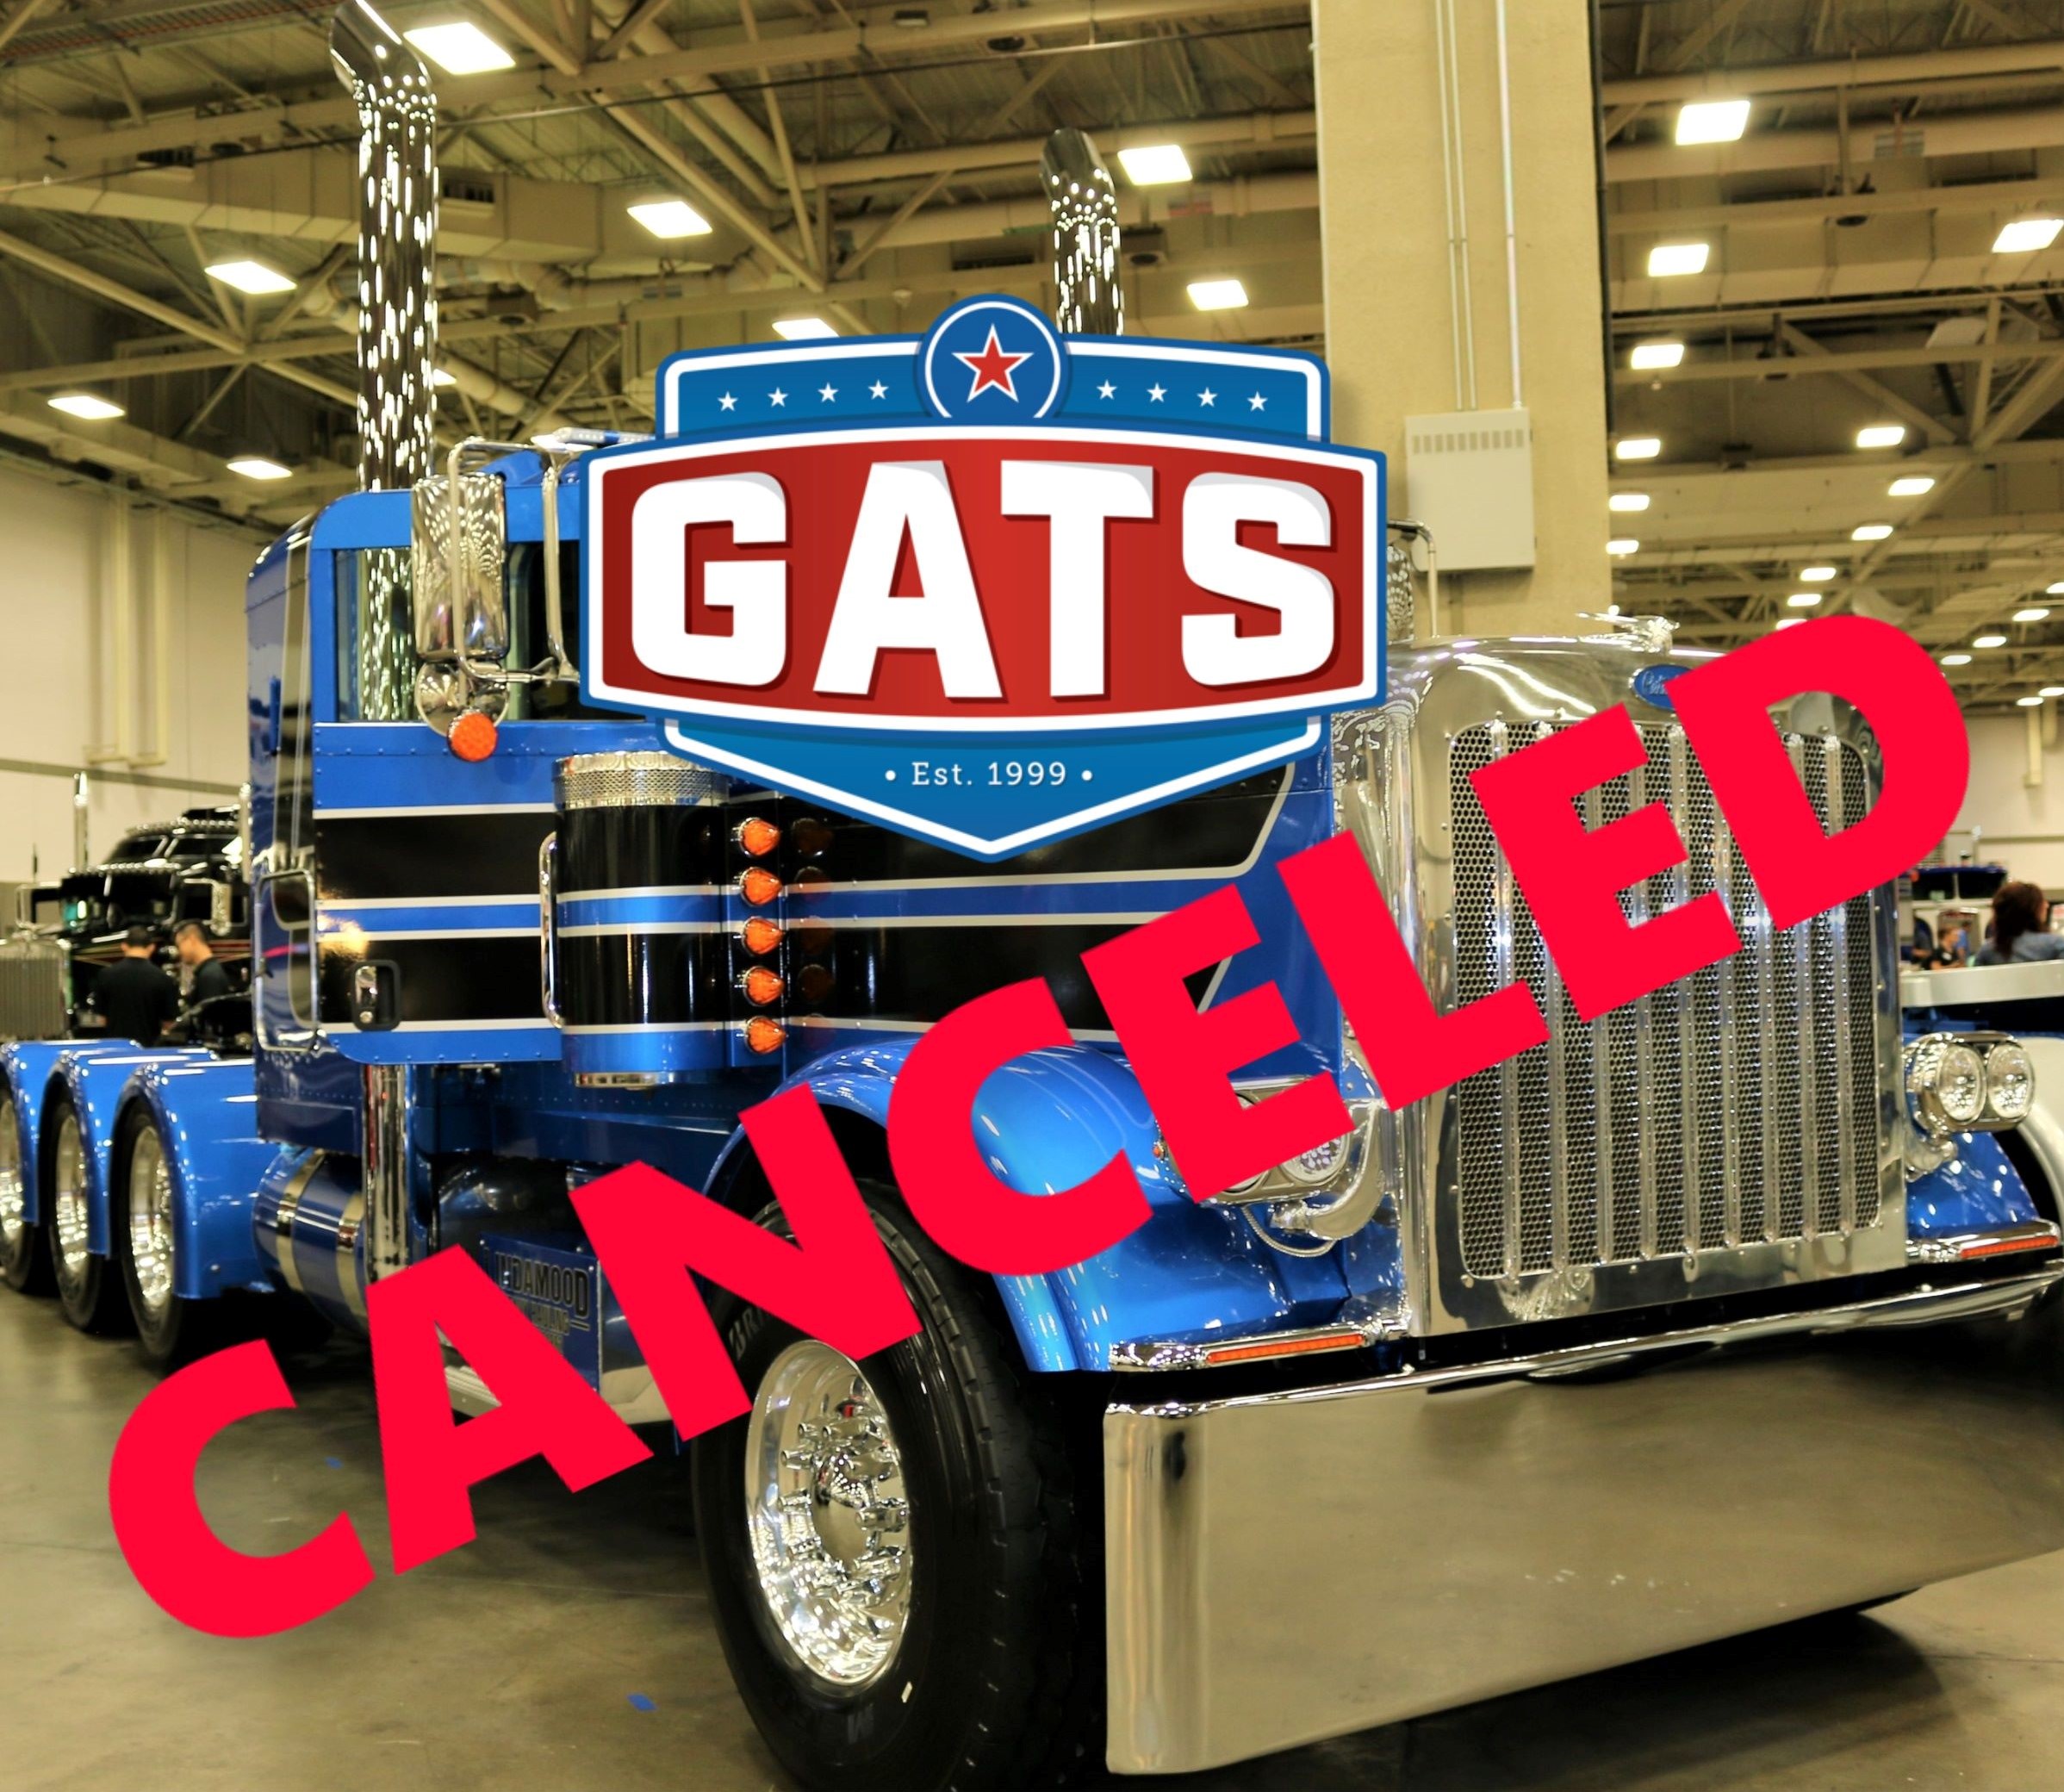 Great American Trucking Show (GATS) is cancelled due to COVID19